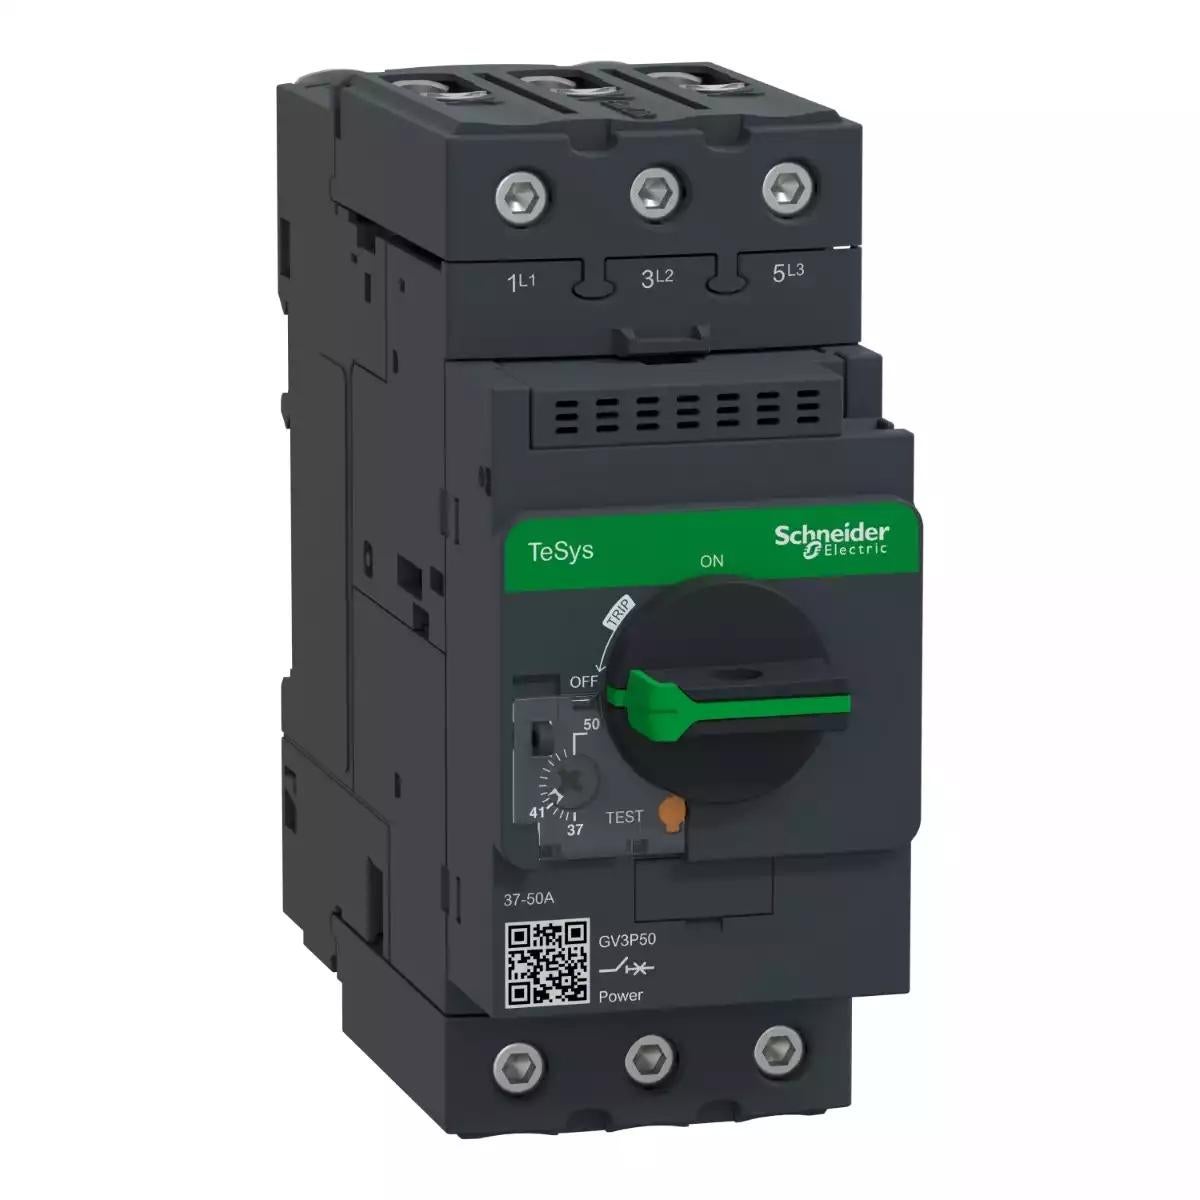 Schneider Electric TeSys GV3 Circuit breaker-thermal-magnetic - 37â€¦50A - EverLink BTR connectors